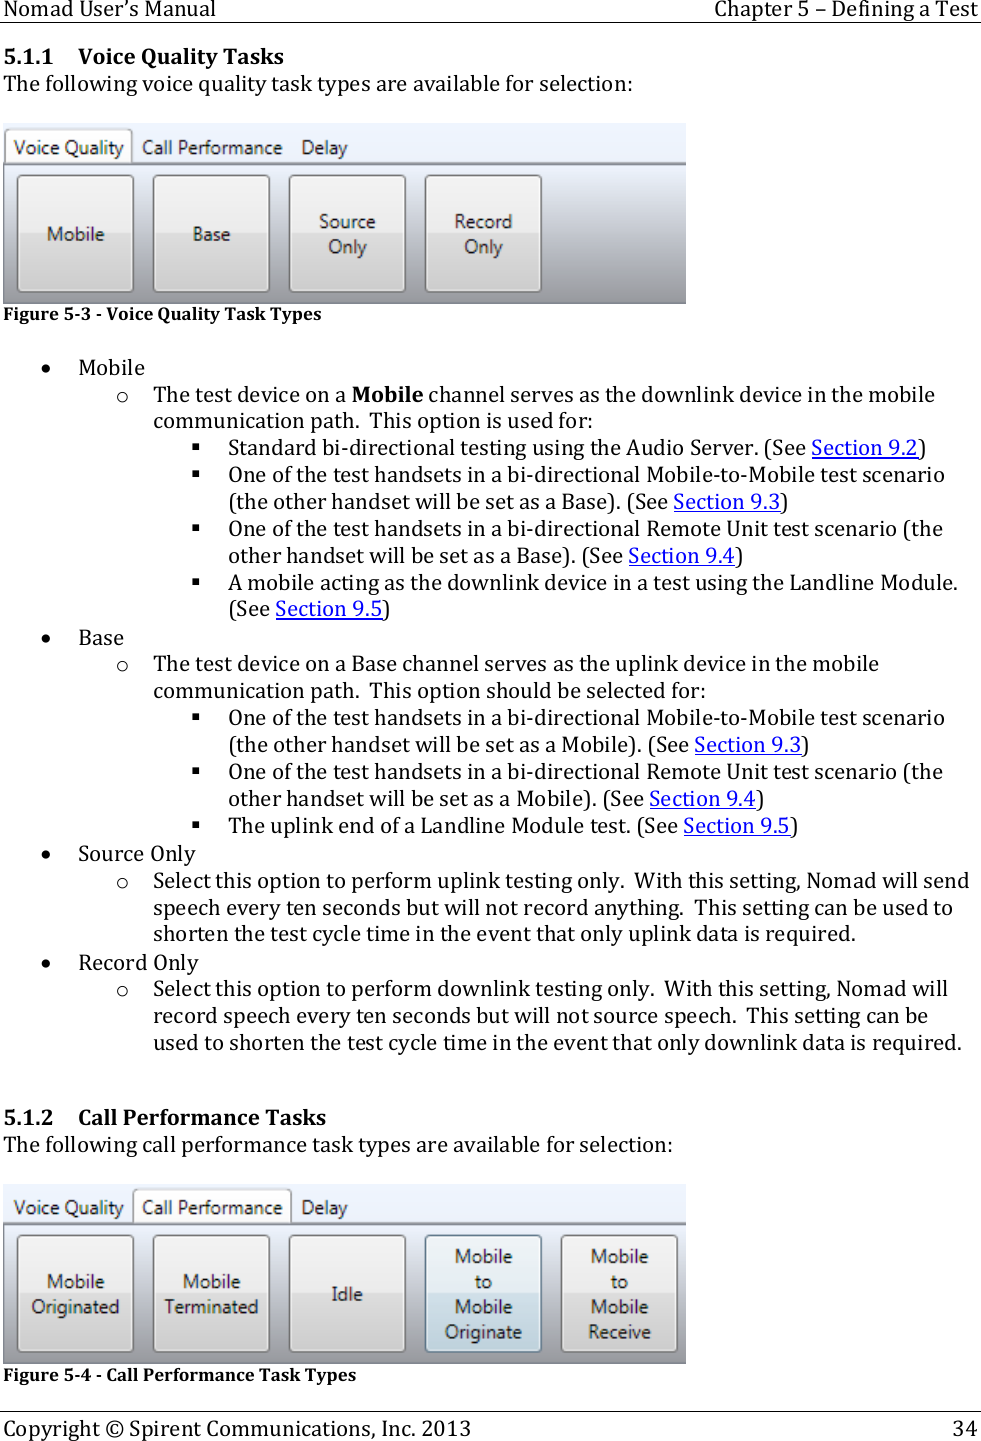  Nomad User’s Manual  Chapter 5 – Defining a Test Copyright © Spirent Communications, Inc. 2013    34  5.1.1 Voice Quality Tasks The following voice quality task types are available for selection:   Figure 5-3 - Voice Quality Task Types   Mobile o The test device on a Mobile channel serves as the downlink device in the mobile communication path.  This option is used for:  Standard bi-directional testing using the Audio Server. (See Section 9.2)  One of the test handsets in a bi-directional Mobile-to-Mobile test scenario (the other handset will be set as a Base). (See Section 9.3)  One of the test handsets in a bi-directional Remote Unit test scenario (the other handset will be set as a Base). (See Section 9.4)  A mobile acting as the downlink device in a test using the Landline Module. (See Section 9.5)  Base o The test device on a Base channel serves as the uplink device in the mobile communication path.  This option should be selected for:  One of the test handsets in a bi-directional Mobile-to-Mobile test scenario (the other handset will be set as a Mobile). (See Section 9.3)  One of the test handsets in a bi-directional Remote Unit test scenario (the other handset will be set as a Mobile). (See Section 9.4)  The uplink end of a Landline Module test. (See Section 9.5)  Source Only o Select this option to perform uplink testing only.  With this setting, Nomad will send speech every ten seconds but will not record anything.  This setting can be used to shorten the test cycle time in the event that only uplink data is required.  Record Only o Select this option to perform downlink testing only.  With this setting, Nomad will record speech every ten seconds but will not source speech.  This setting can be used to shorten the test cycle time in the event that only downlink data is required.  5.1.2 Call Performance Tasks The following call performance task types are available for selection:   Figure 5-4 - Call Performance Task Types 